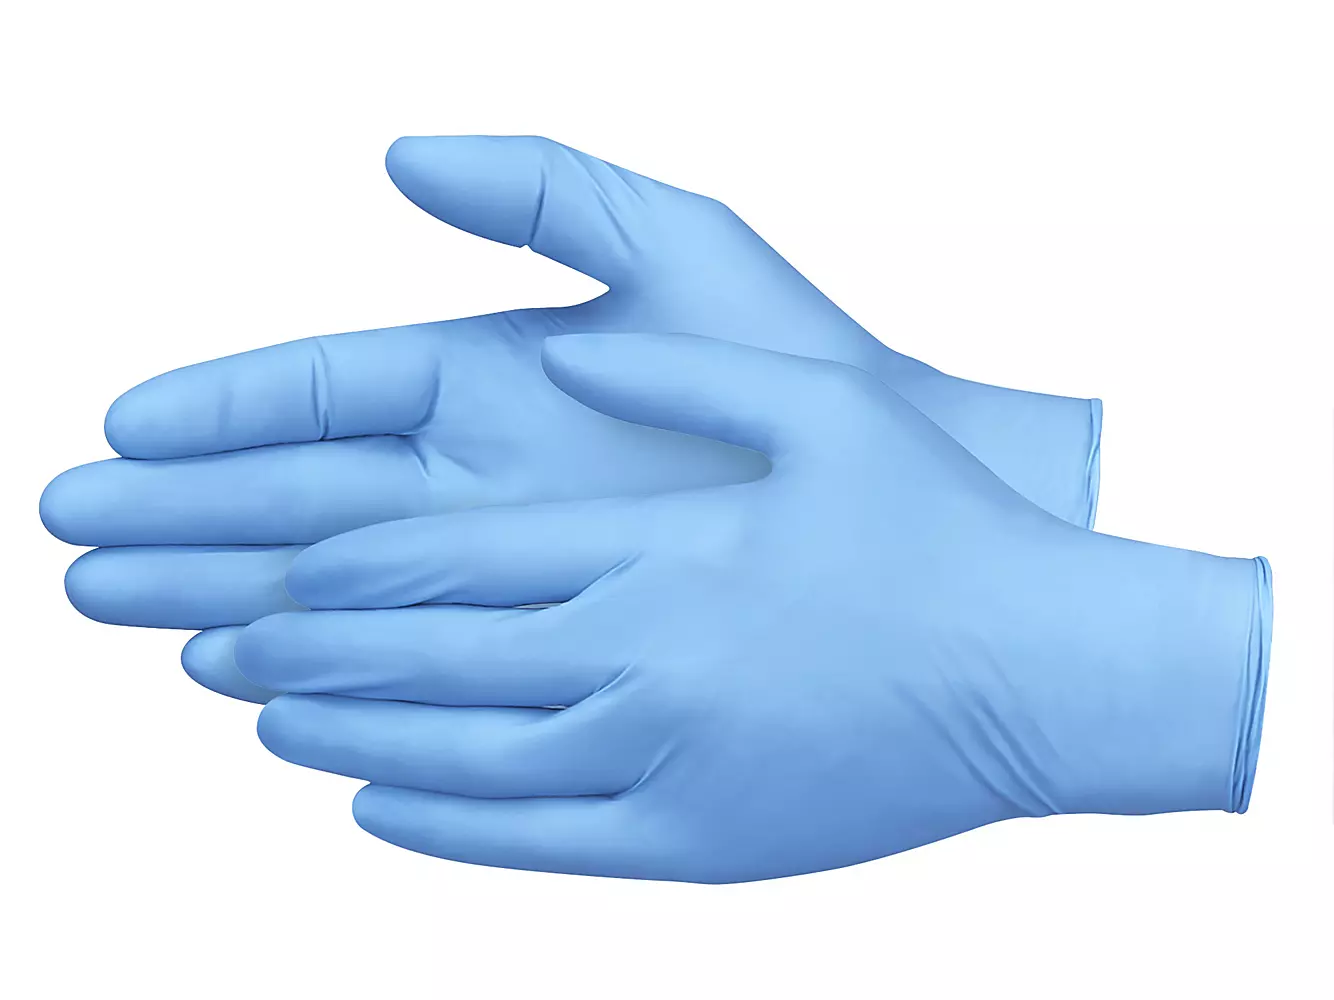 Got questions on nitrile gloves?